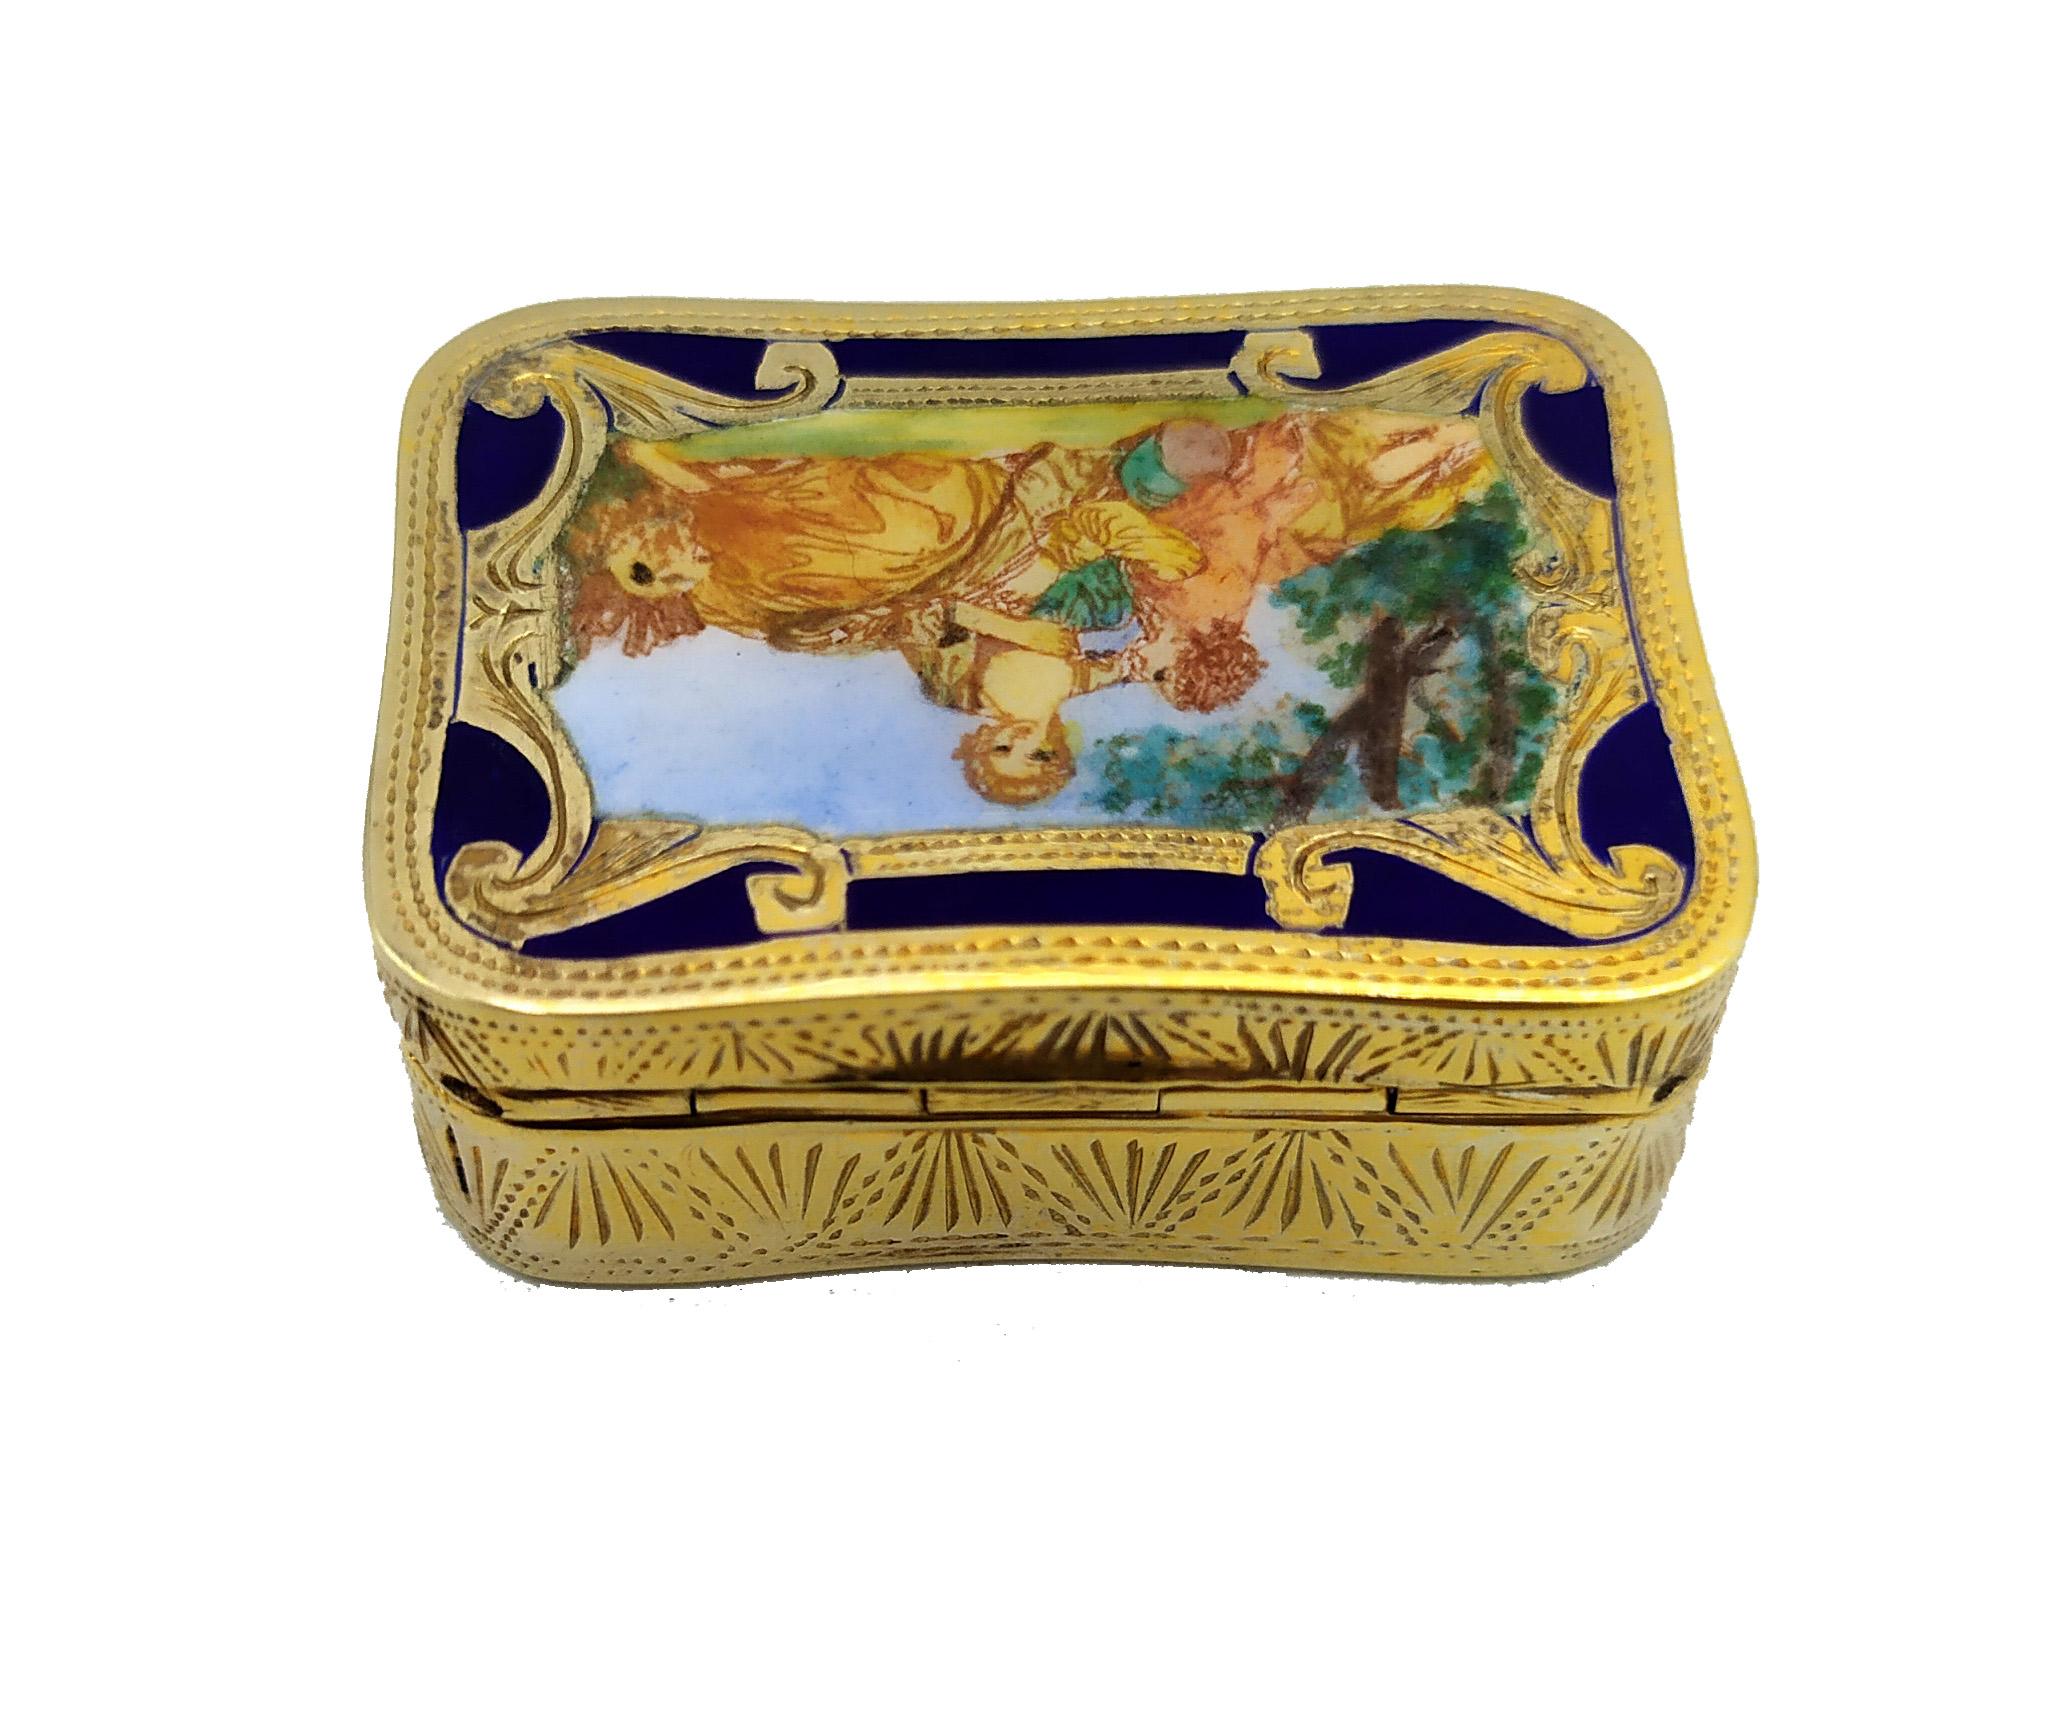 Hand-Carved Pill Box fired Enamel Miniature Louis XVI style Sterling Silver Salimbeni For Sale